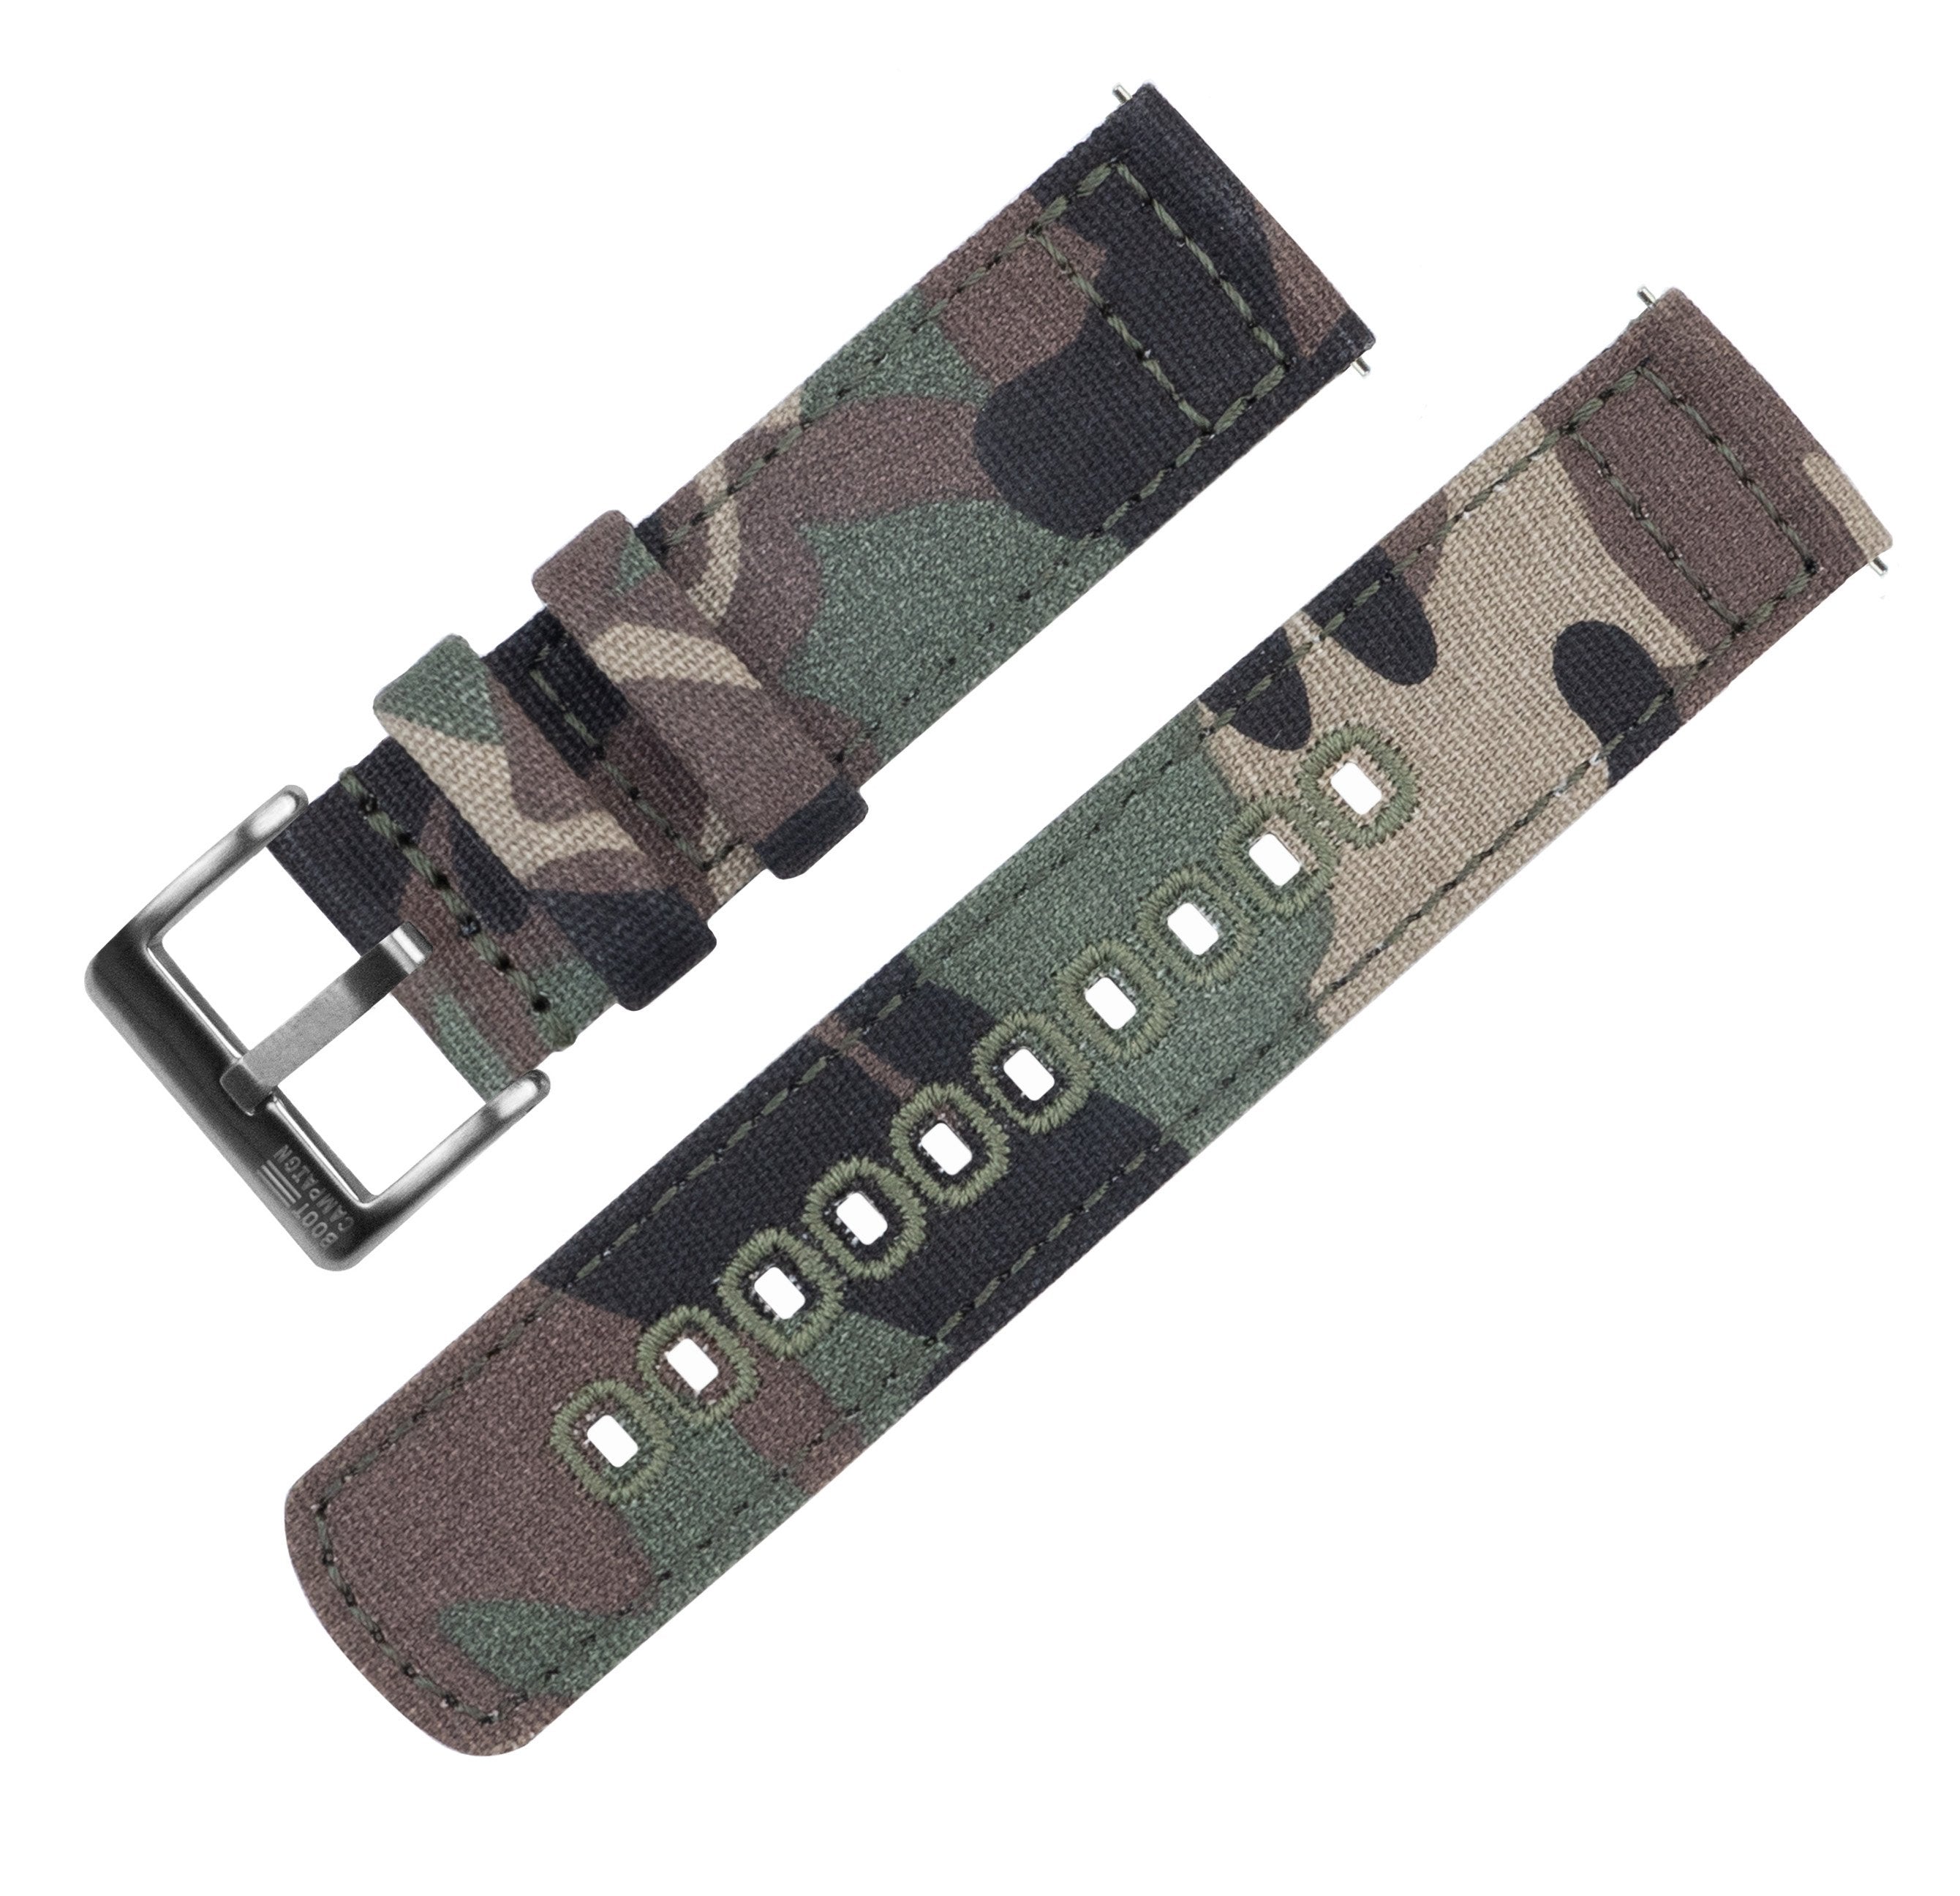 Camouflage Crafted Canvas Watch Band